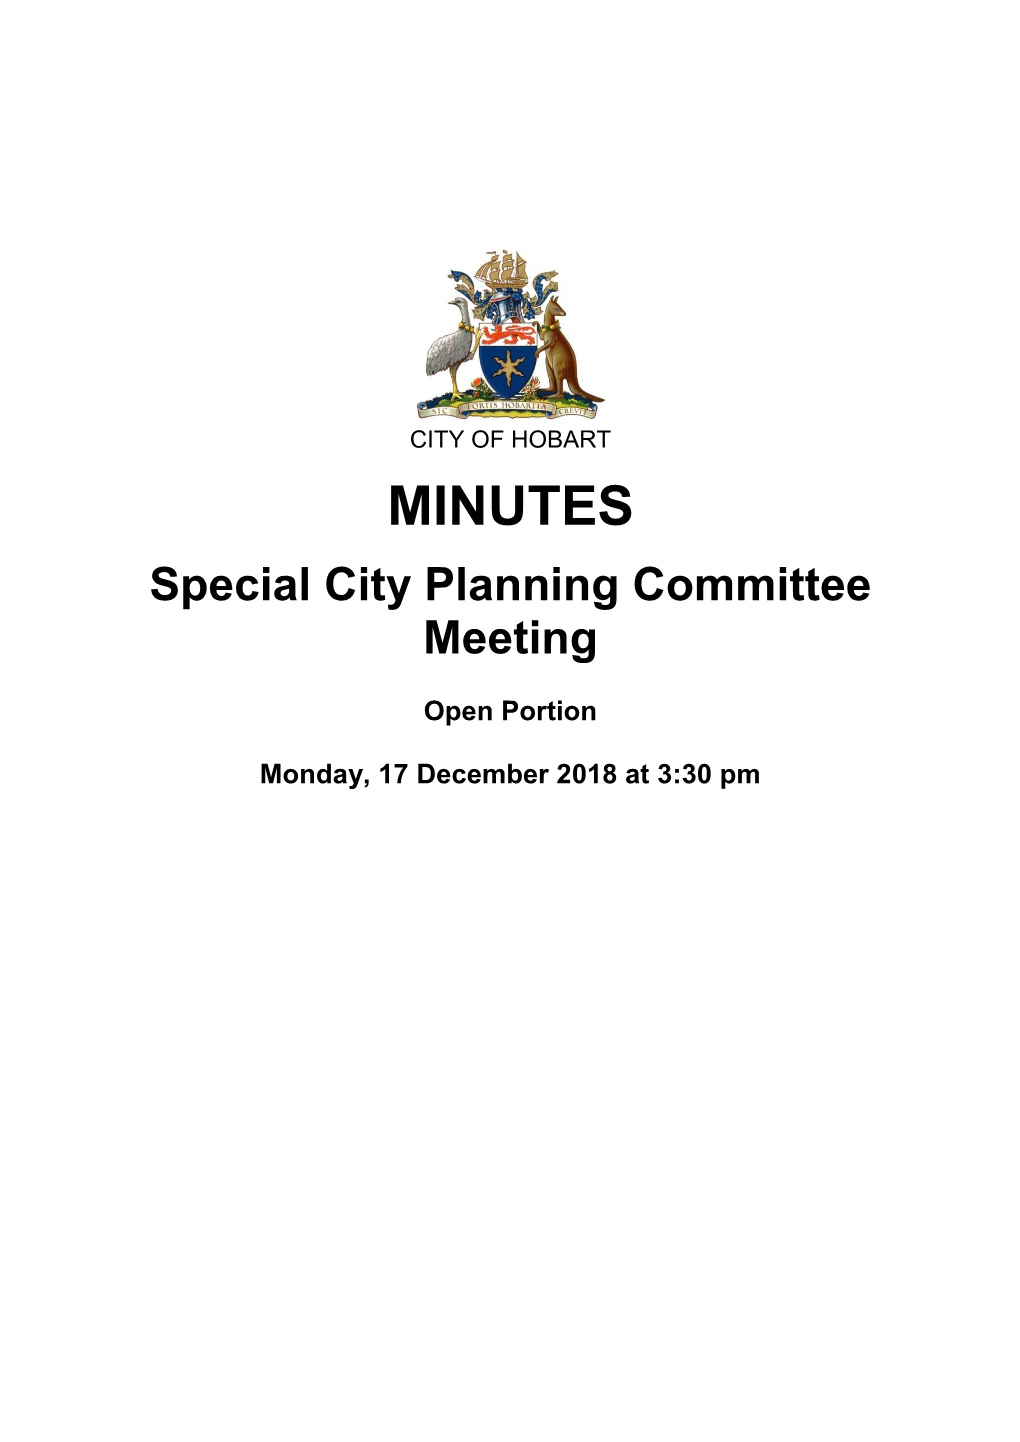 Minutes of Special City Planning Committee Meeting